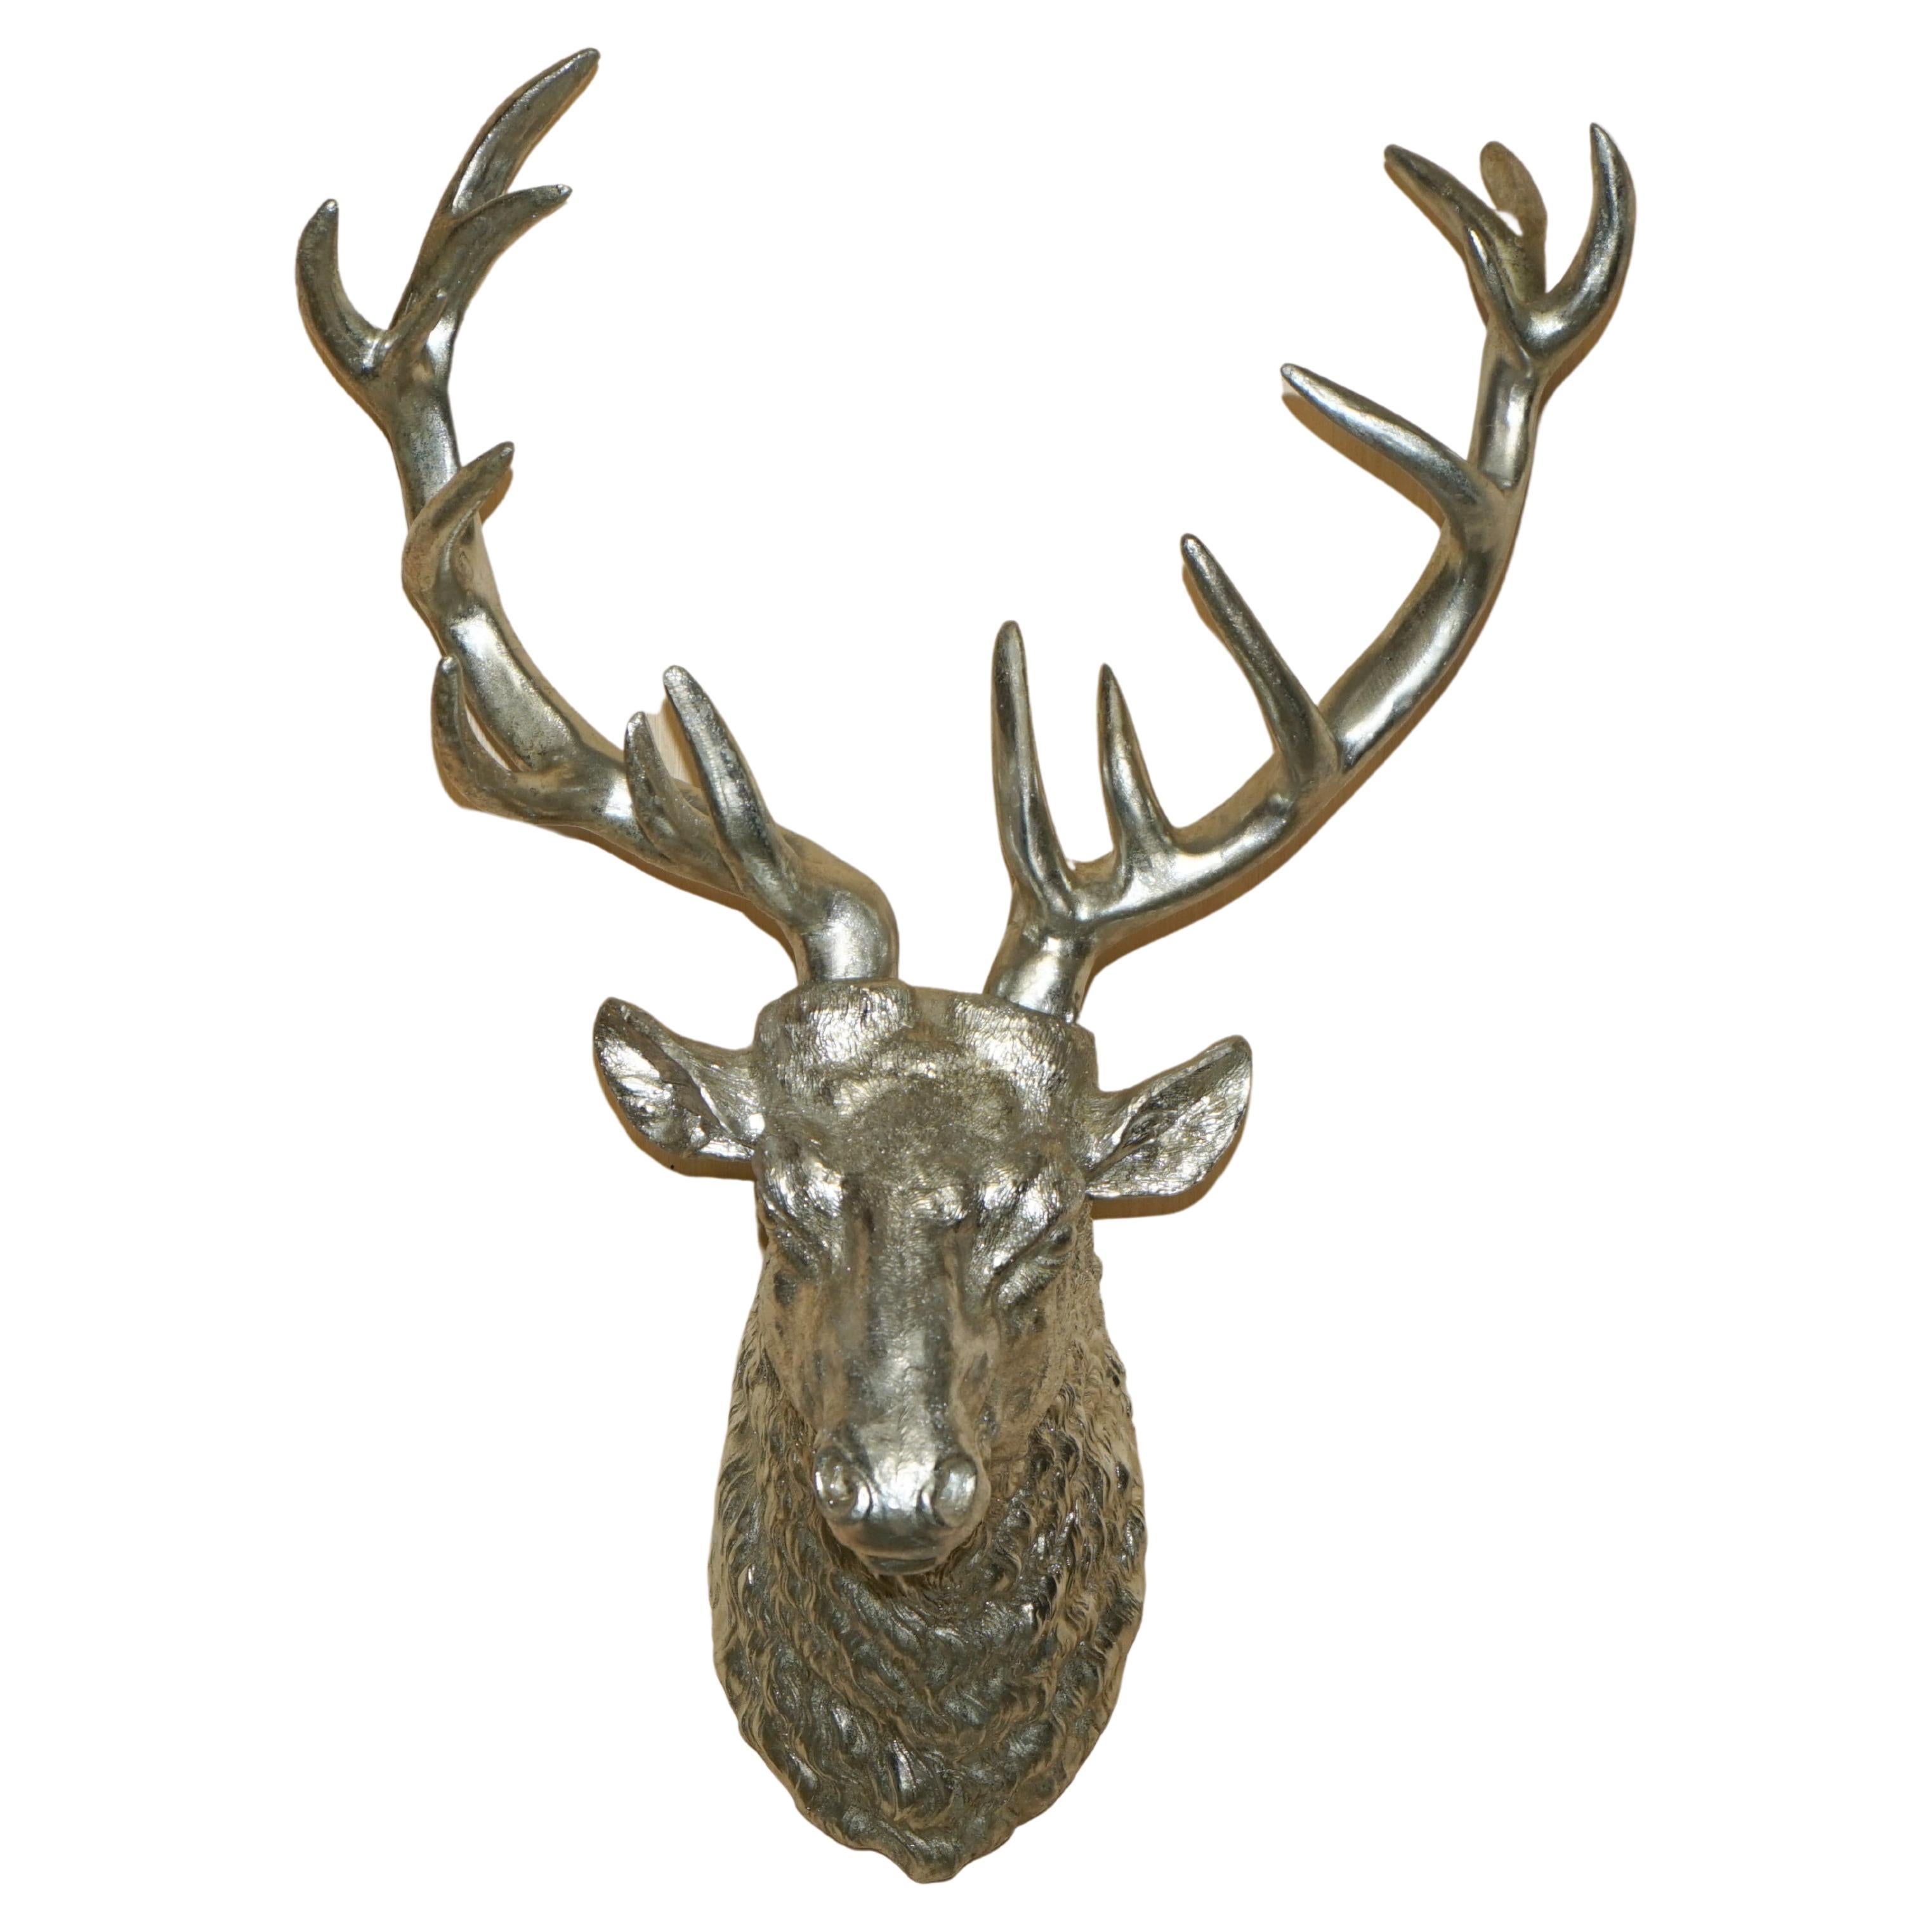 FULL SIZED SILVERED DEER STAG HEAD WiTH REMOVABLE ANTLERS DECORATIVE FOIL FINISH For Sale